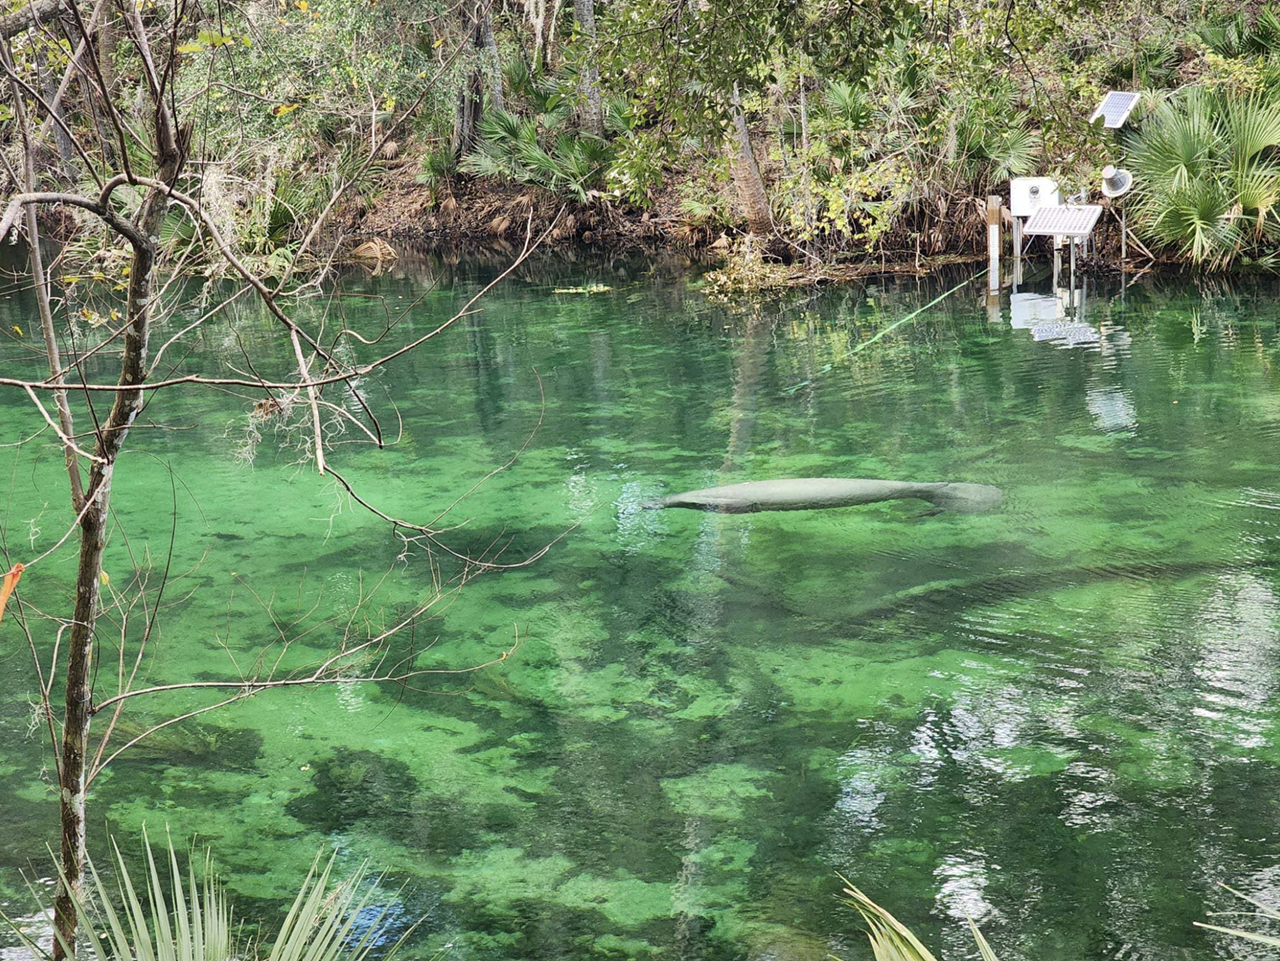 Blue Spring State Park
1 hour from Orlando
Encounter the gentle giants we call manatees at this crystal-clear spring. More than 700 manatees have made this park their home. Swimming, snorkeling, scuba diving and boat tours are available for all guests.